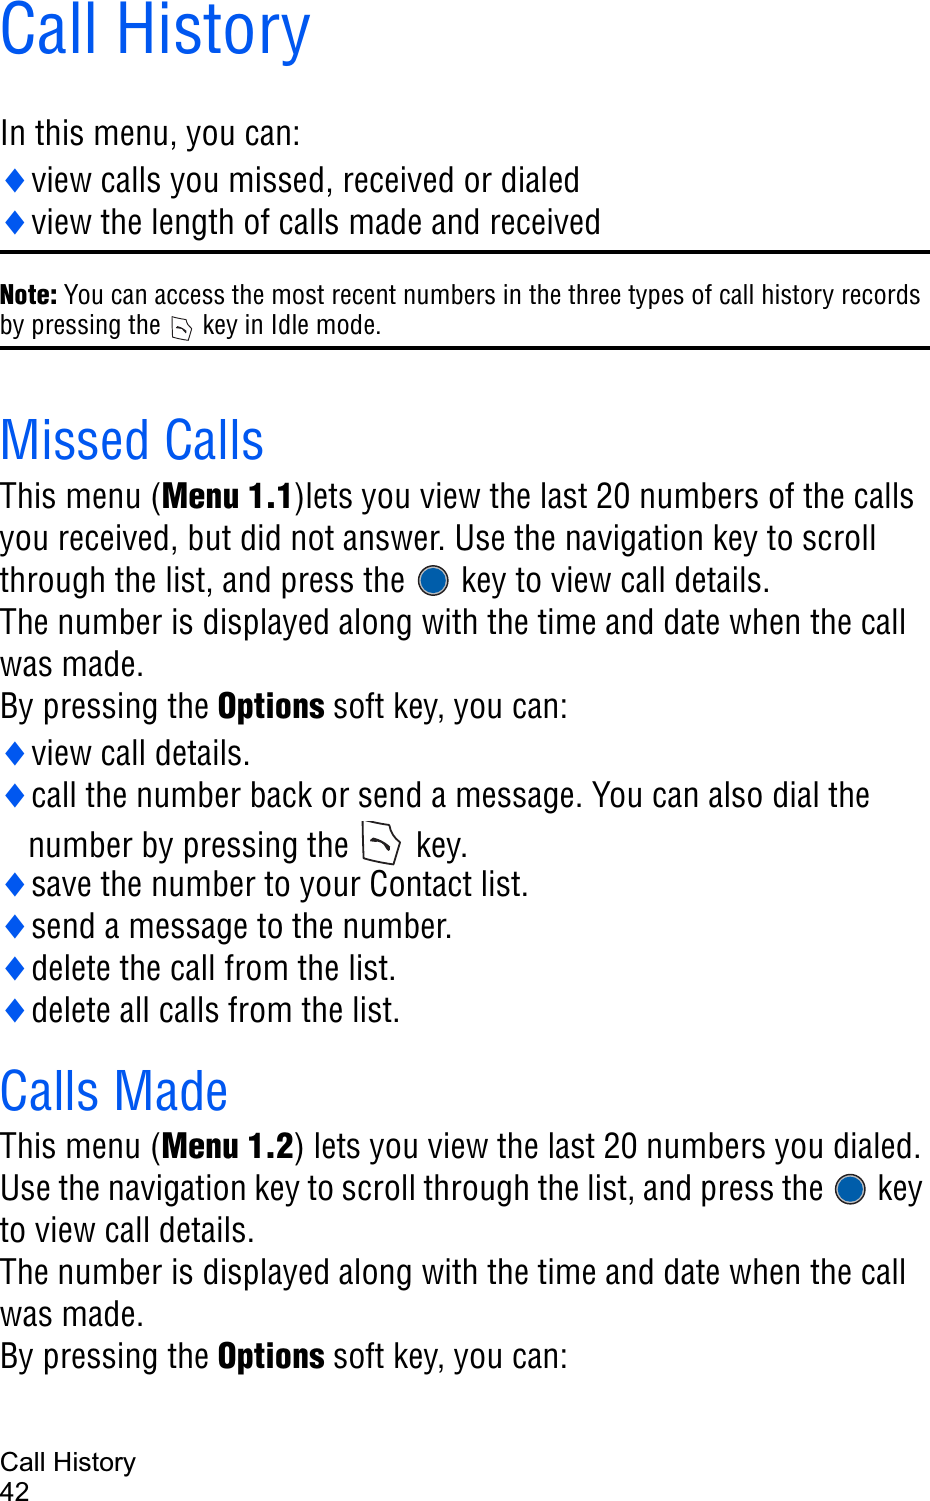 Call History42Call HistoryIn this menu, you can:iview calls you missed, received or dialediview the length of calls made and receivedNote: You can access the most recent numbers in the three types of call history records by pressing the   key in Idle mode.Missed Calls This menu (Menu 1.1)lets you view the last 20 numbers of the calls you received, but did not answer. Use the navigation key to scroll through the list, and press the   key to view call details.The number is displayed along with the time and date when the call was made. By pressing the Options soft key, you can:iview call details.icall the number back or send a message. You can also dial the number by pressing the  key.isave the number to your Contact list.isend a message to the number.idelete the call from the list.idelete all calls from the list.Calls MadeThis menu (Menu 1.2) lets you view the last 20 numbers you dialed. Use the navigation key to scroll through the list, and press the   key to view call details.The number is displayed along with the time and date when the call was made. By pressing the Options soft key, you can: